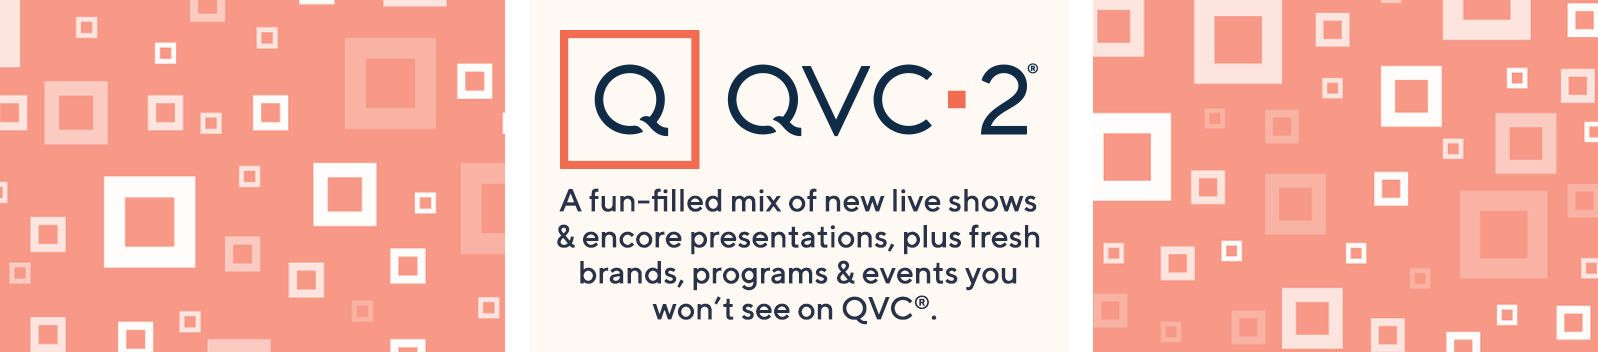 QVC2®  A fun-filled mix of new live shows & encore presentations, plus fresh brands, programs & events you won’t see on QVC®.